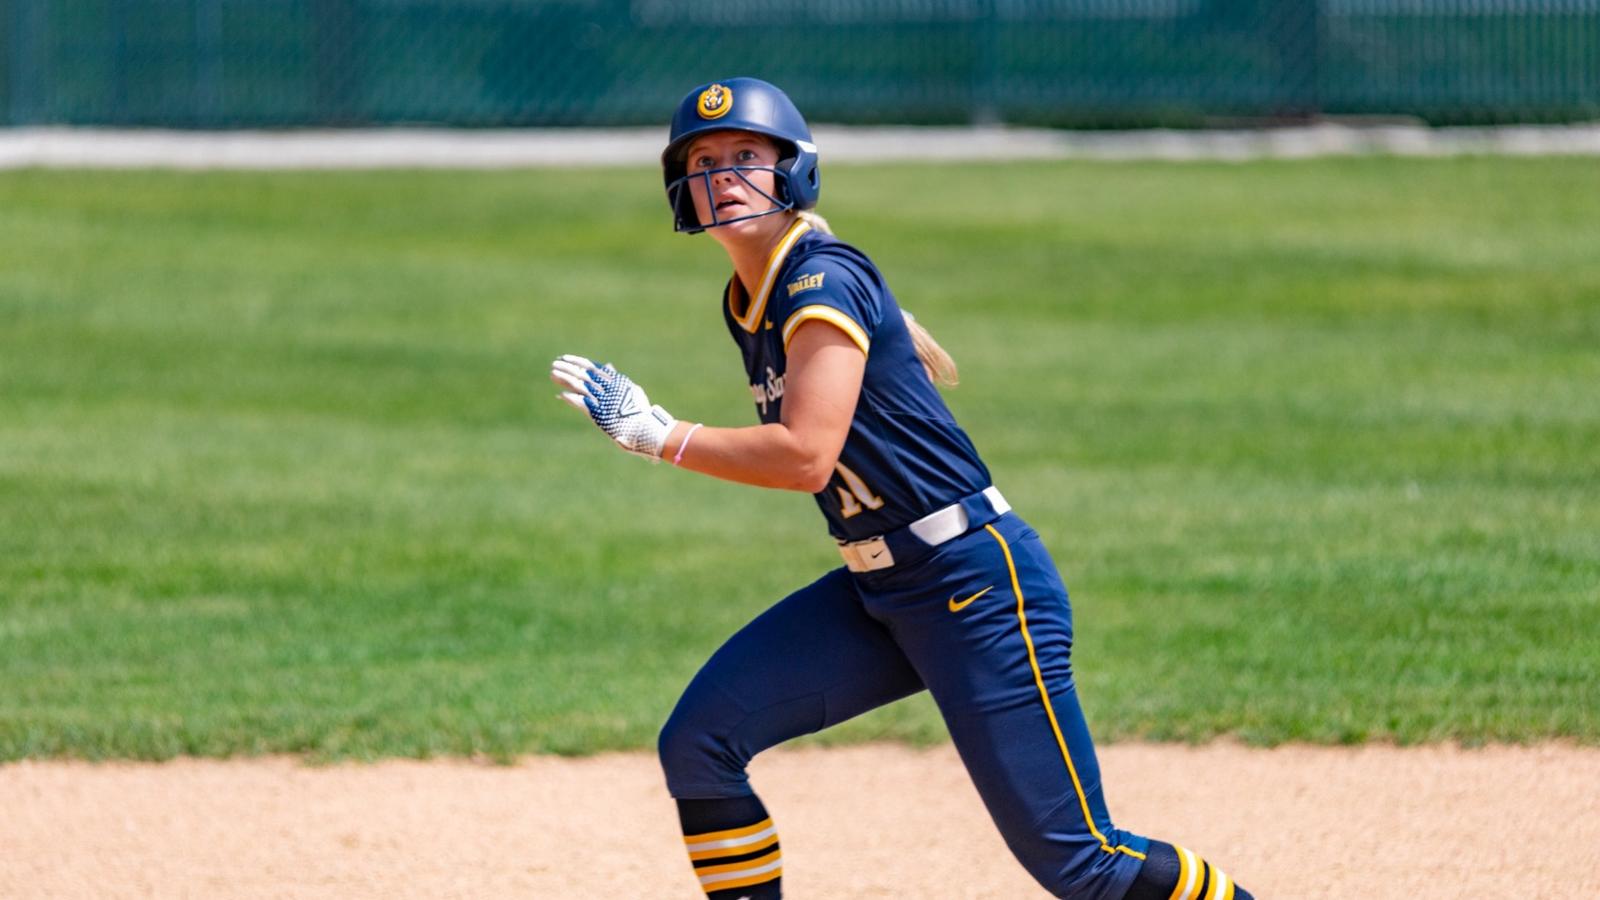 Murray State Softball Dominates Valparaiso with Doubleheader Sweep and Impressive Performance by Jenna Veber